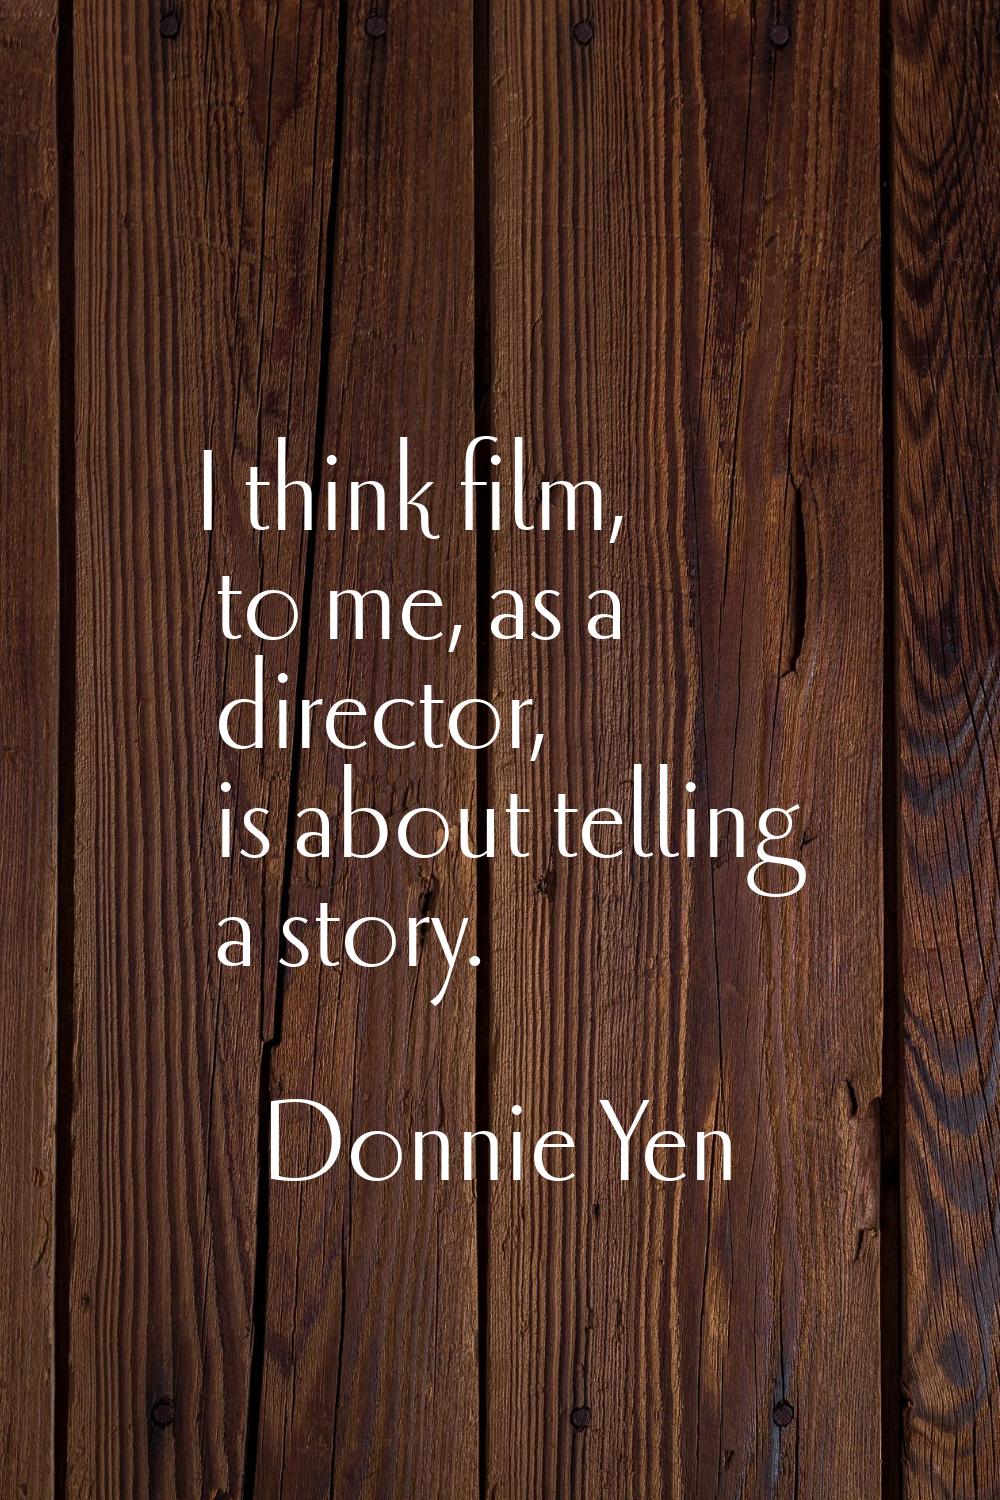 I think film, to me, as a director, is about telling a story.